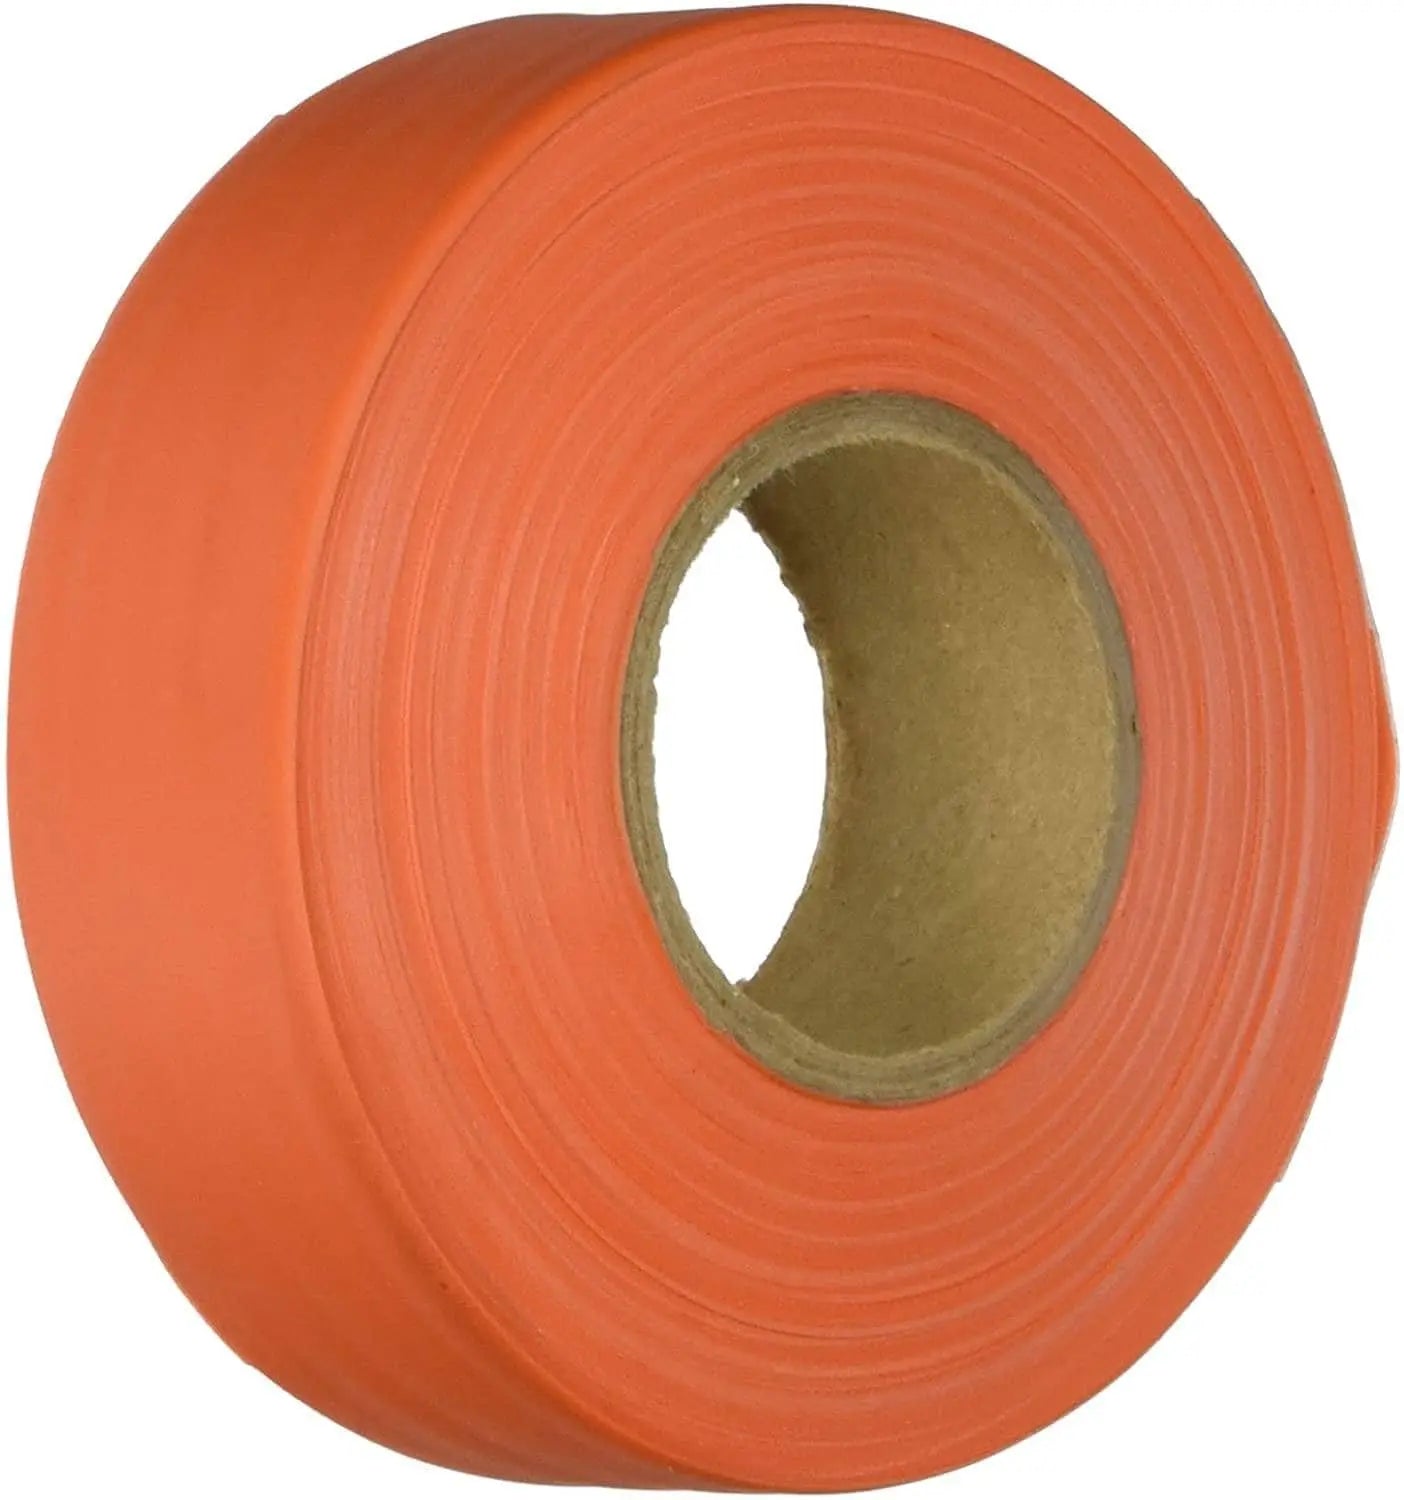 IRWIN - 300 - Orange Flagging Tape - Becker Safety and Supply